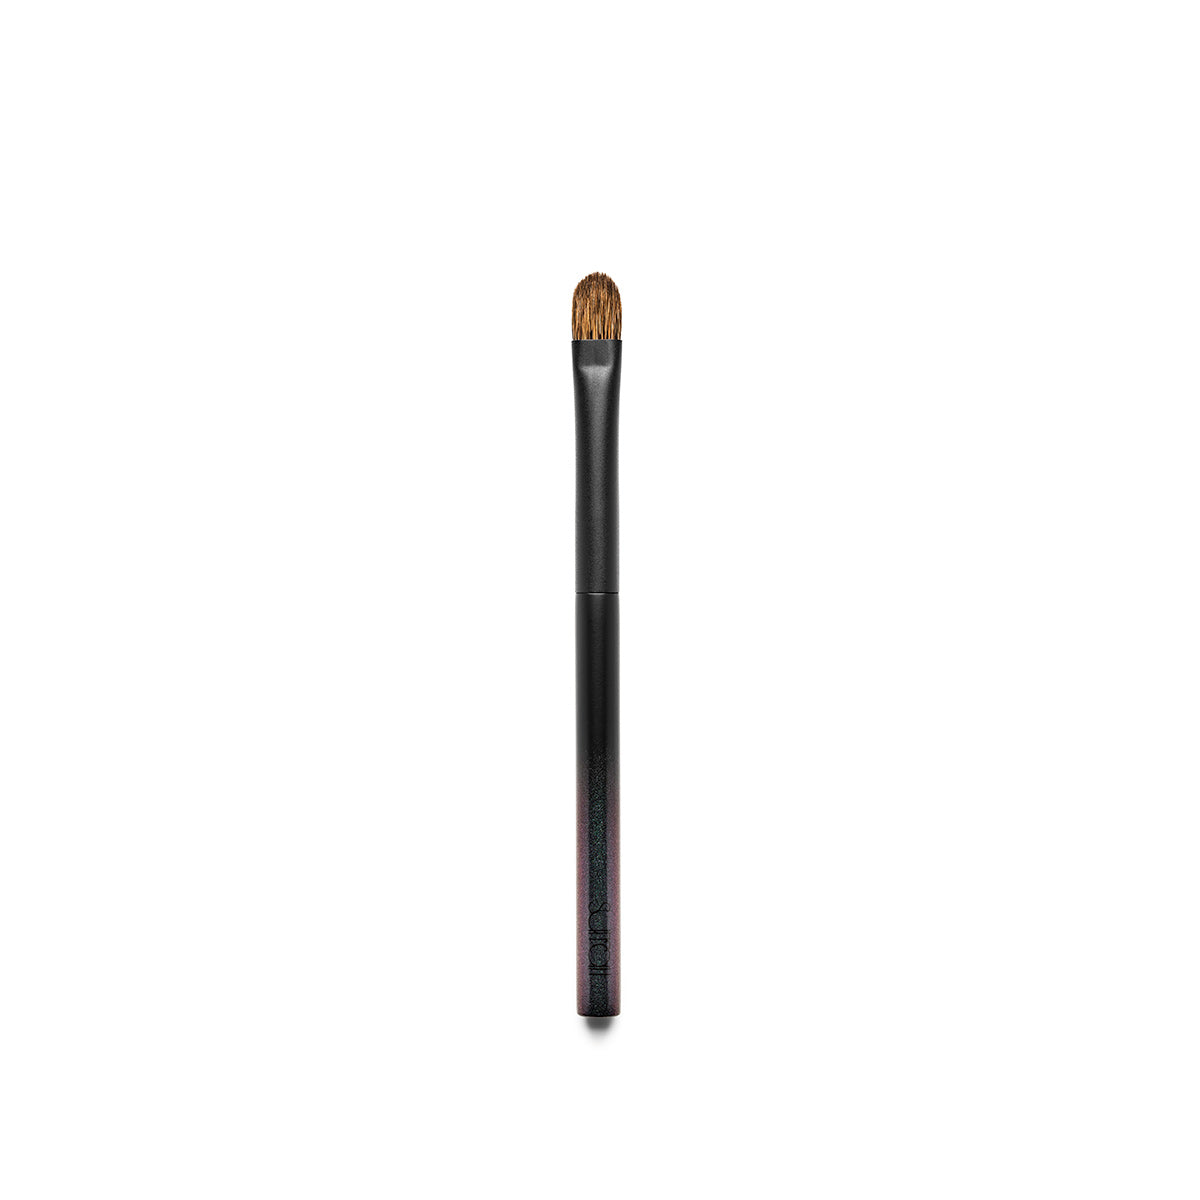 ultra-soft natural hair makeup brush for eyeshadow in size medium 